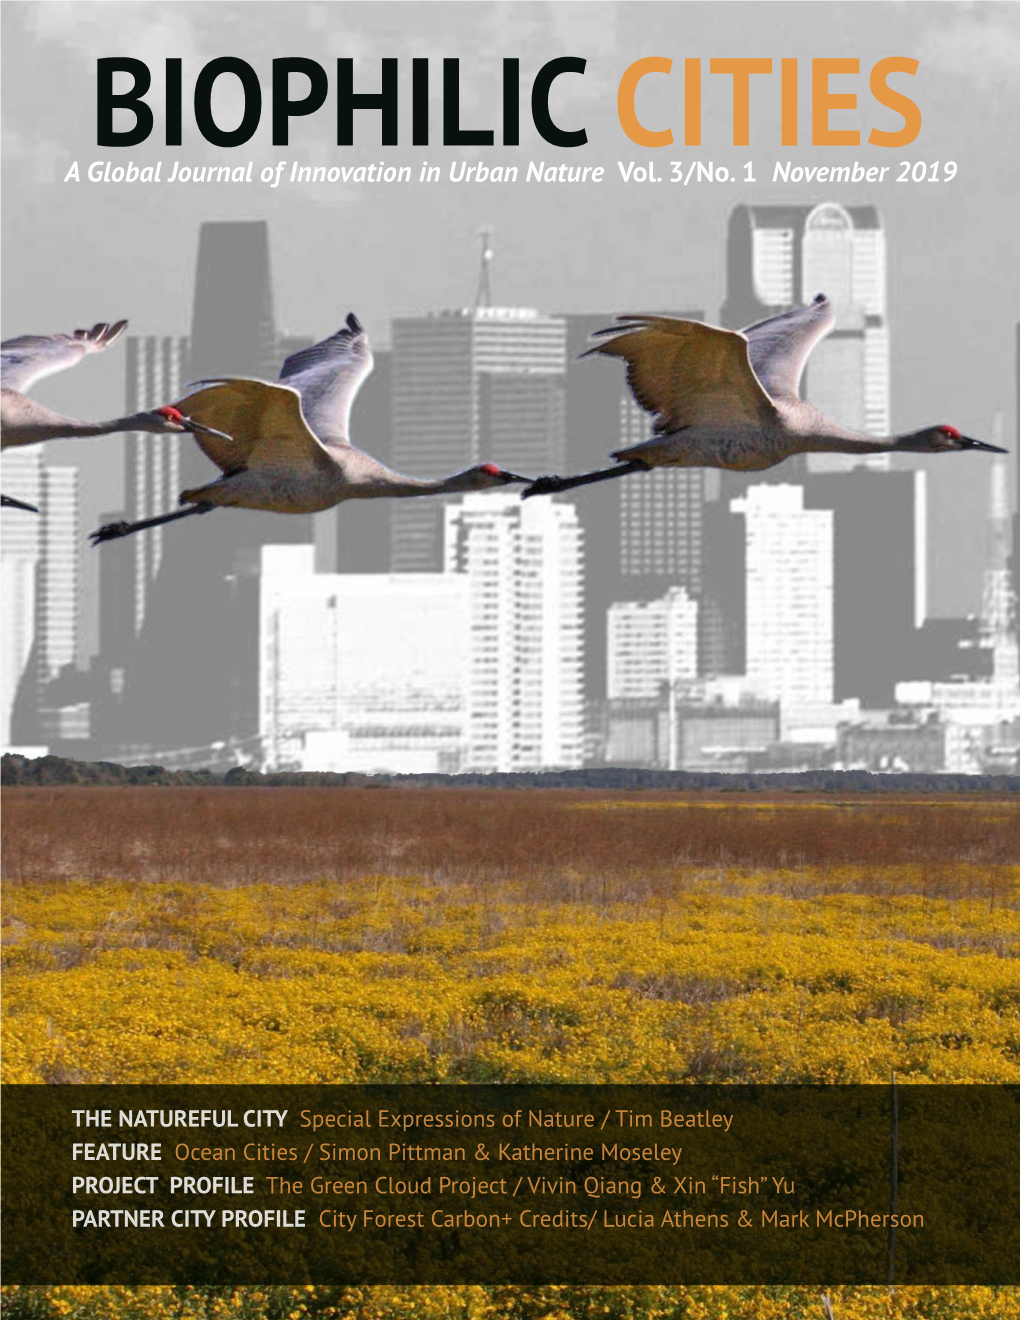 A Global Journal of Innovation in Urban Nature Vol. 3/No. 1 November 2019